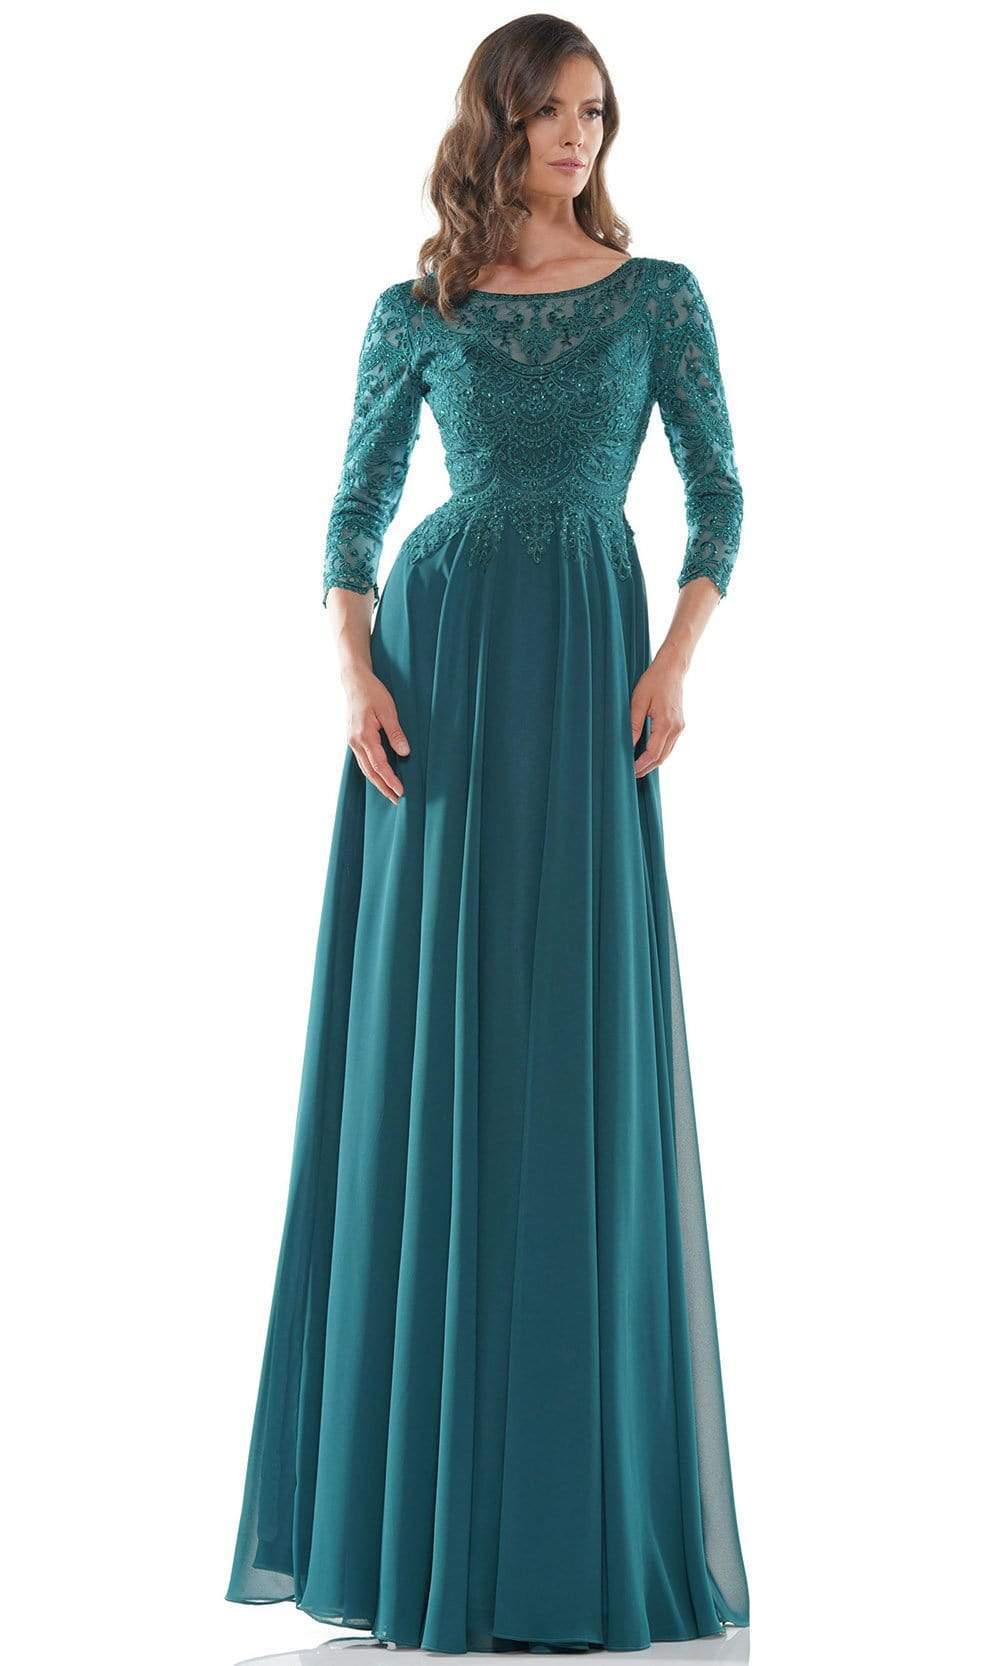 Marsoni by Colors - M238SL Embroidered Bodice Chiffon A-Line Gown Mother of the Bride Dresses 4 / Deep Green